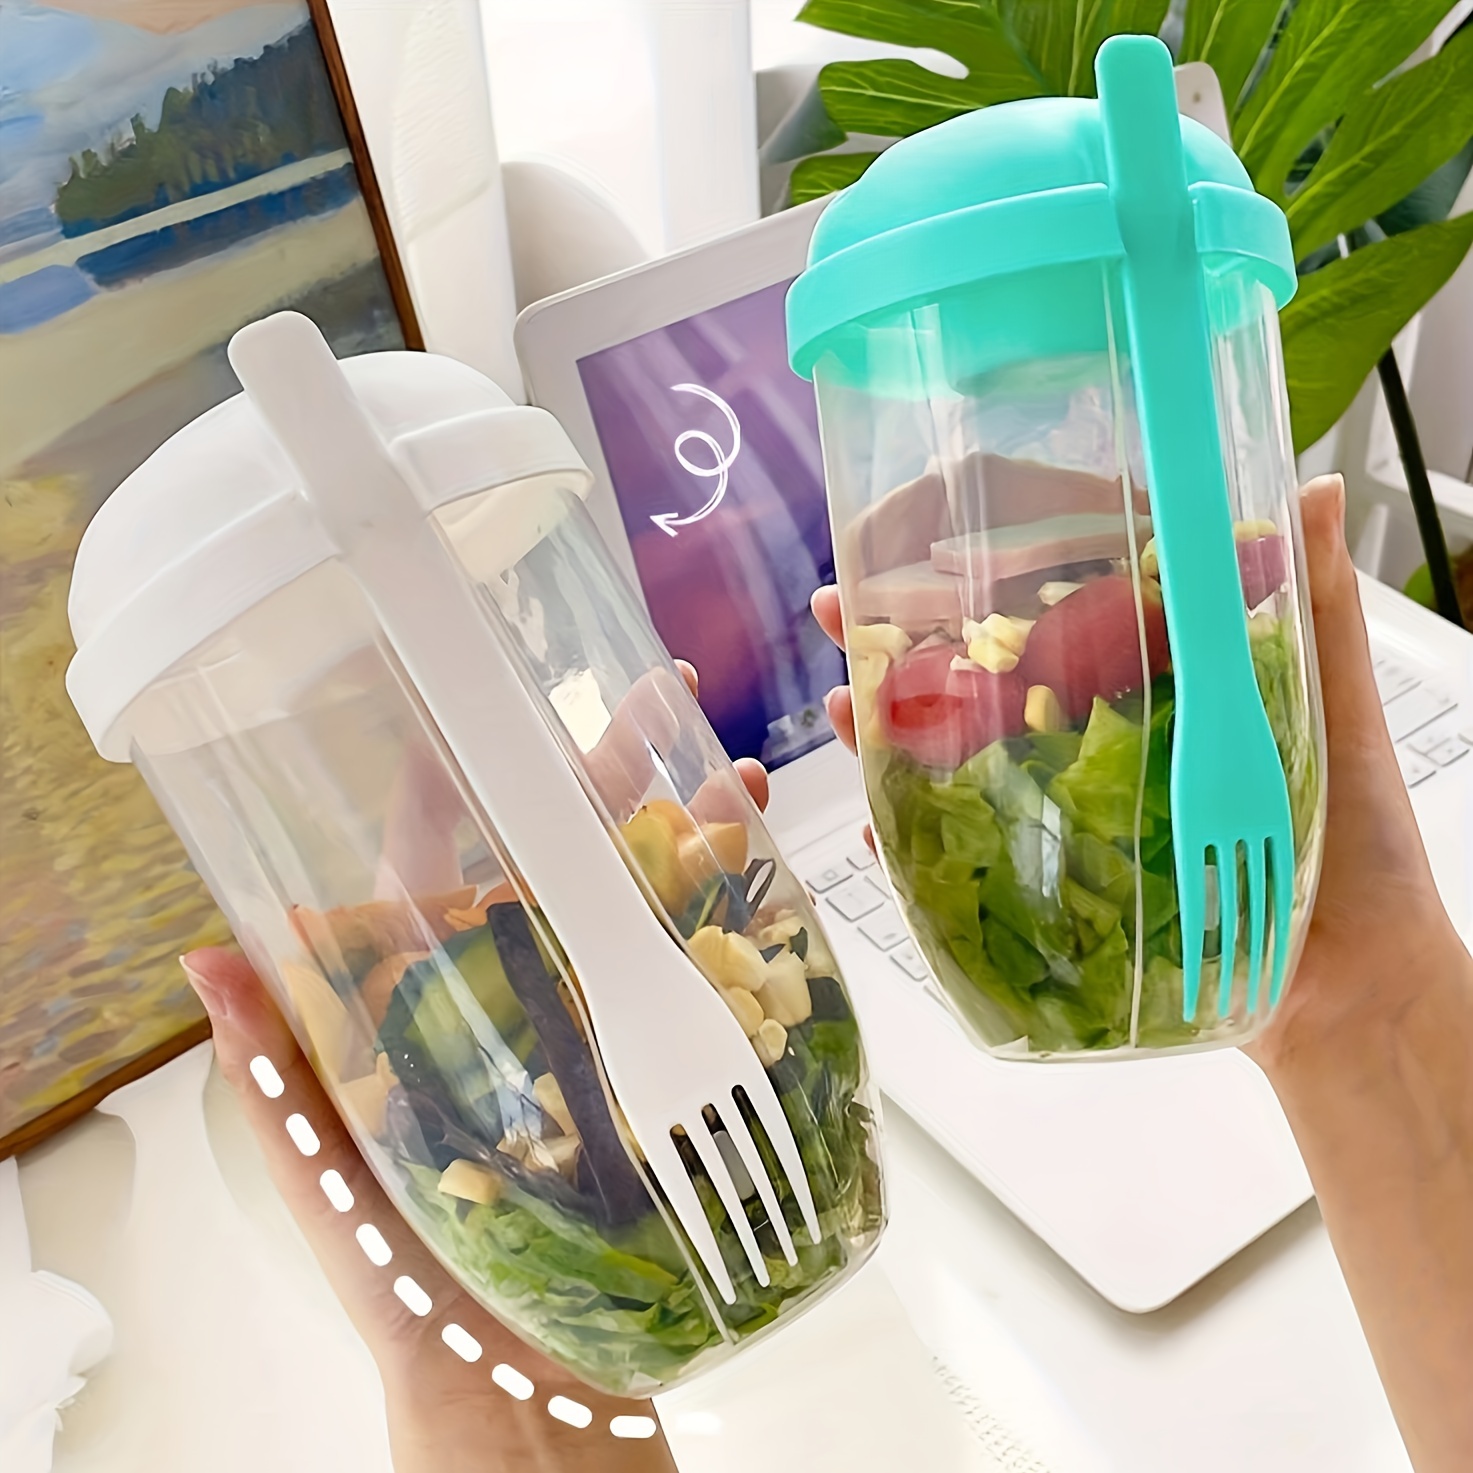 1pc Salad Cup, Portable Salad Meal Shaker Cup, Plastic Healthy